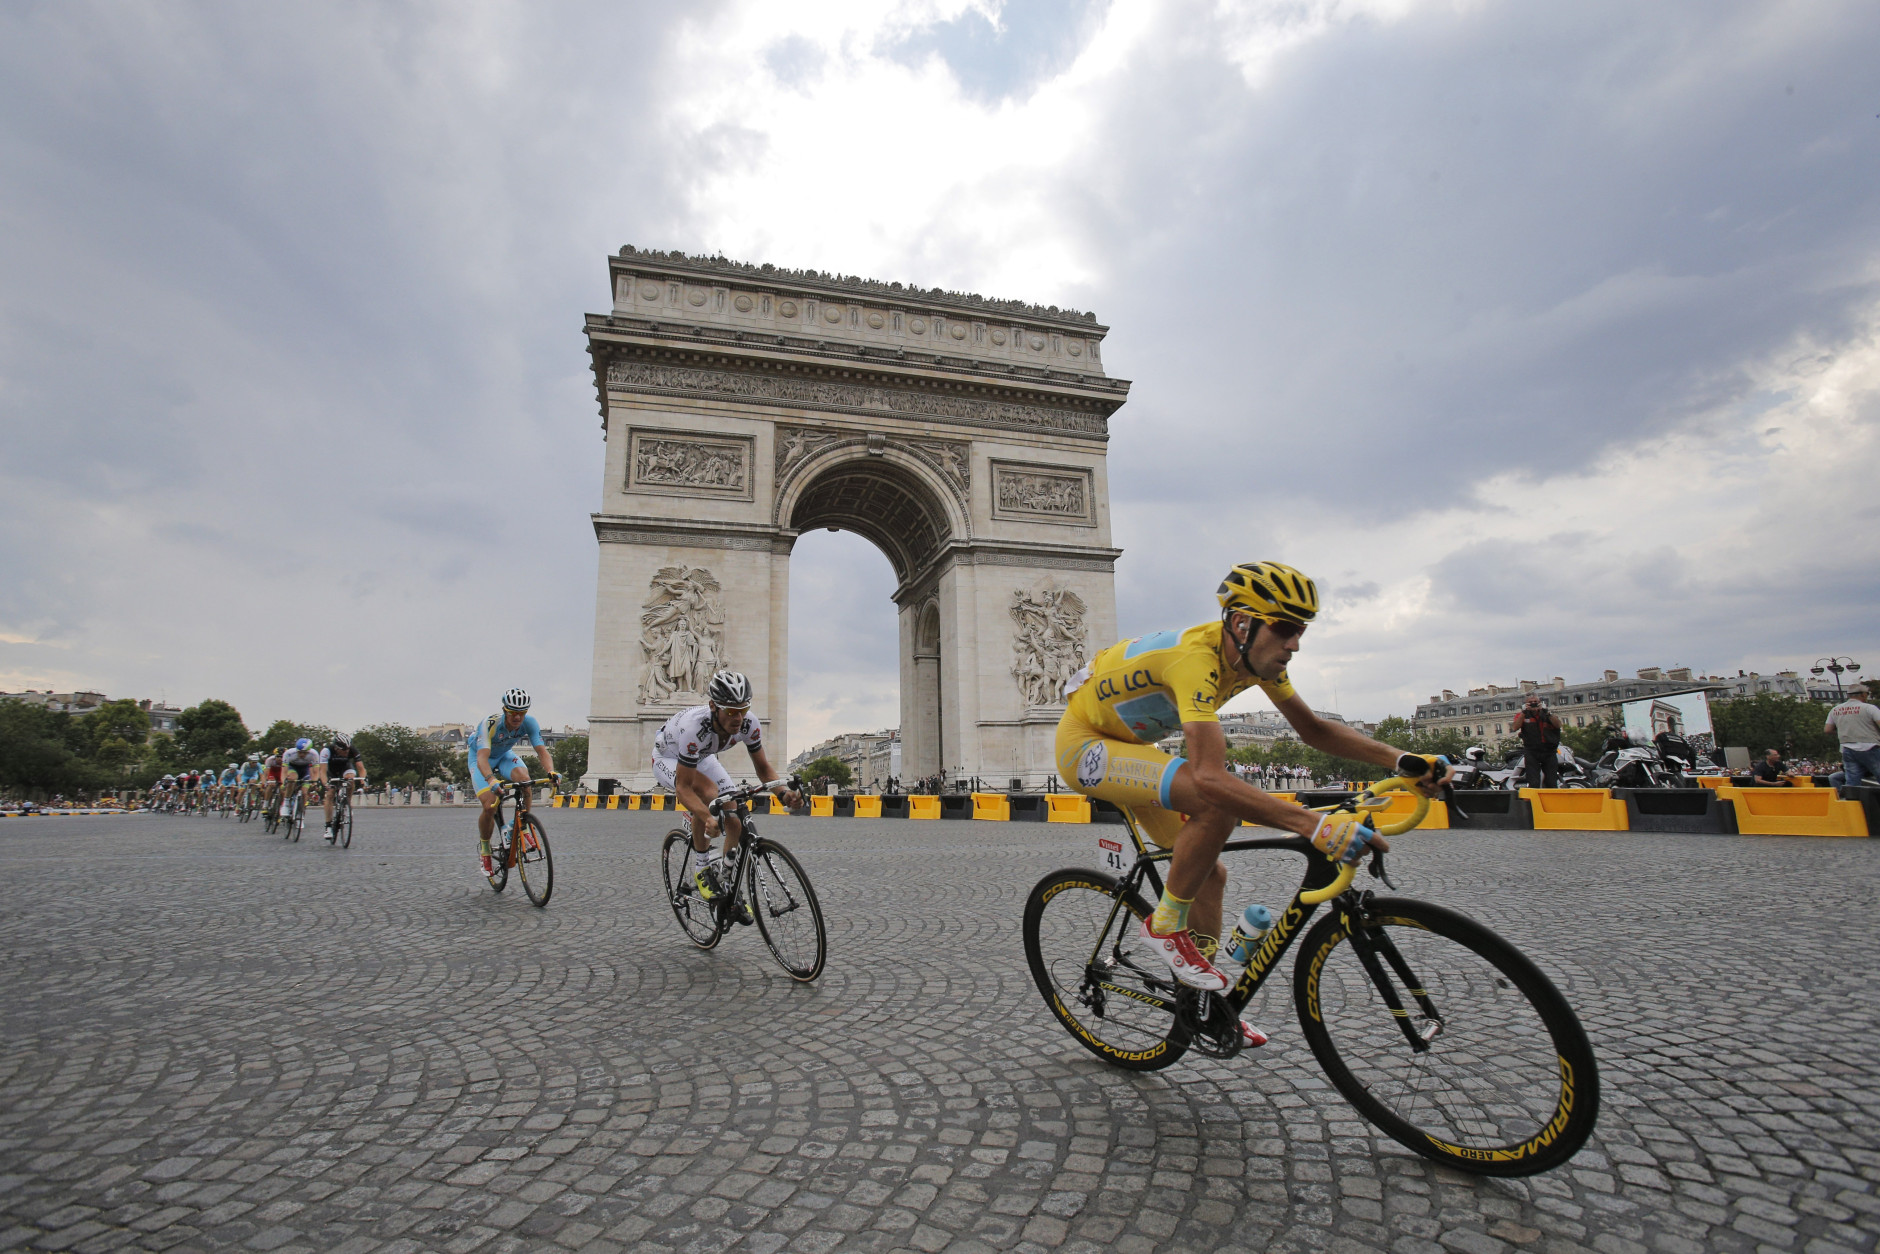 FOR USE AS DESIRED, YEAR END PHOTOS - FILE - Italy's Vincenzo Nibali, wearing the overall leader's yellow jersey, passes the Arc de Triomphe during the twenty-first and last stage of the Tour de France cycling race over 137.5 kilometers (85.4 miles) with start in Evry and finish in Paris, France, Sunday, July 27, 2014. (AP Photo/Christophe Ena, File)